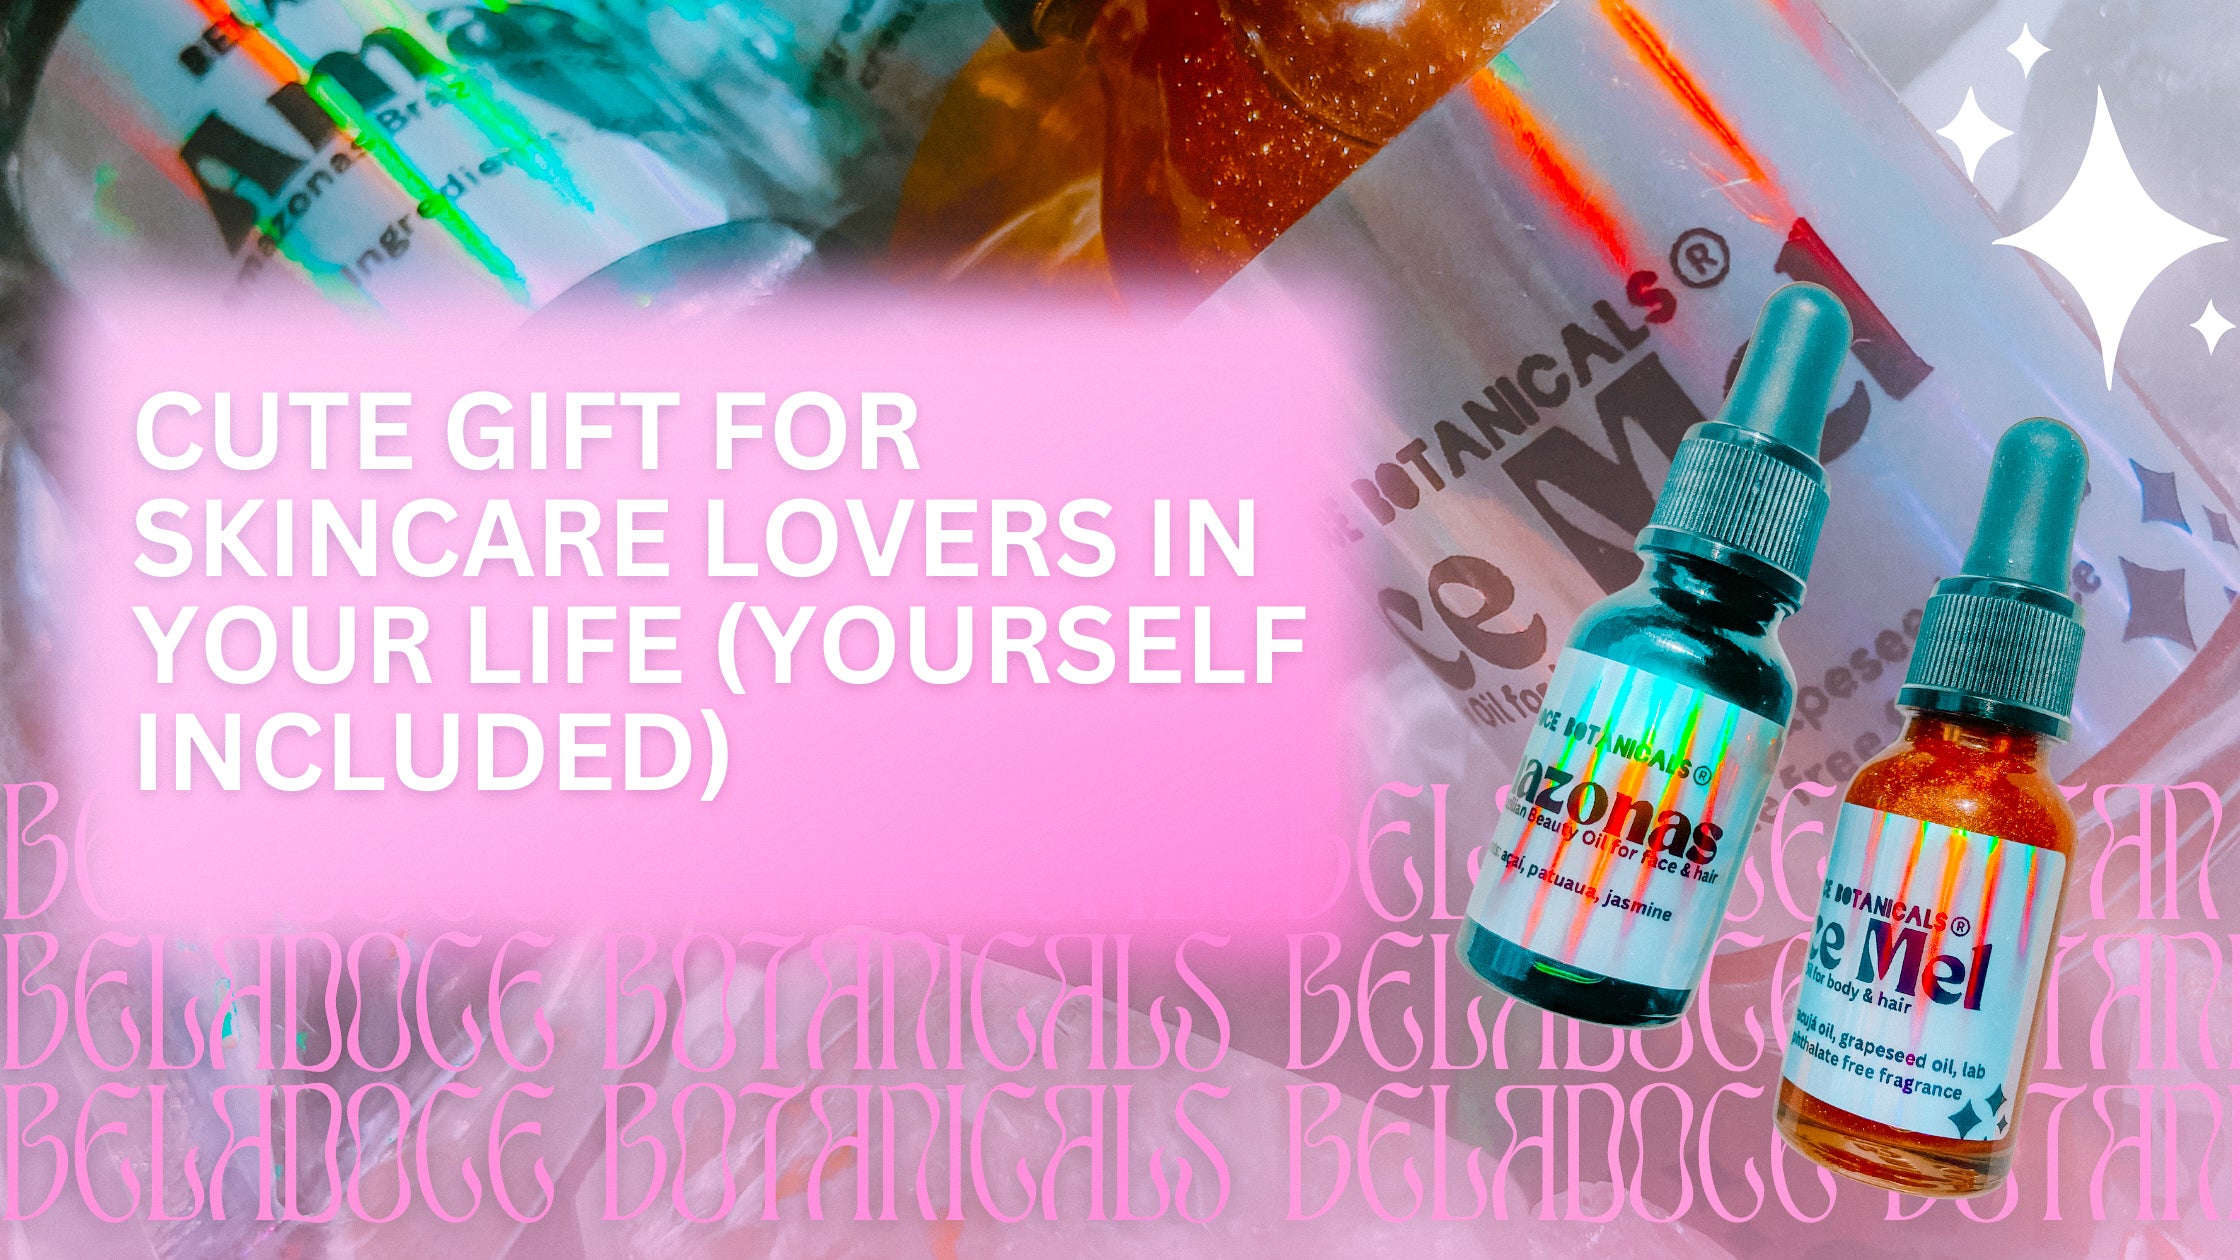 The set also makes a very cute gift for the skincare lovers in your life (yourself included).